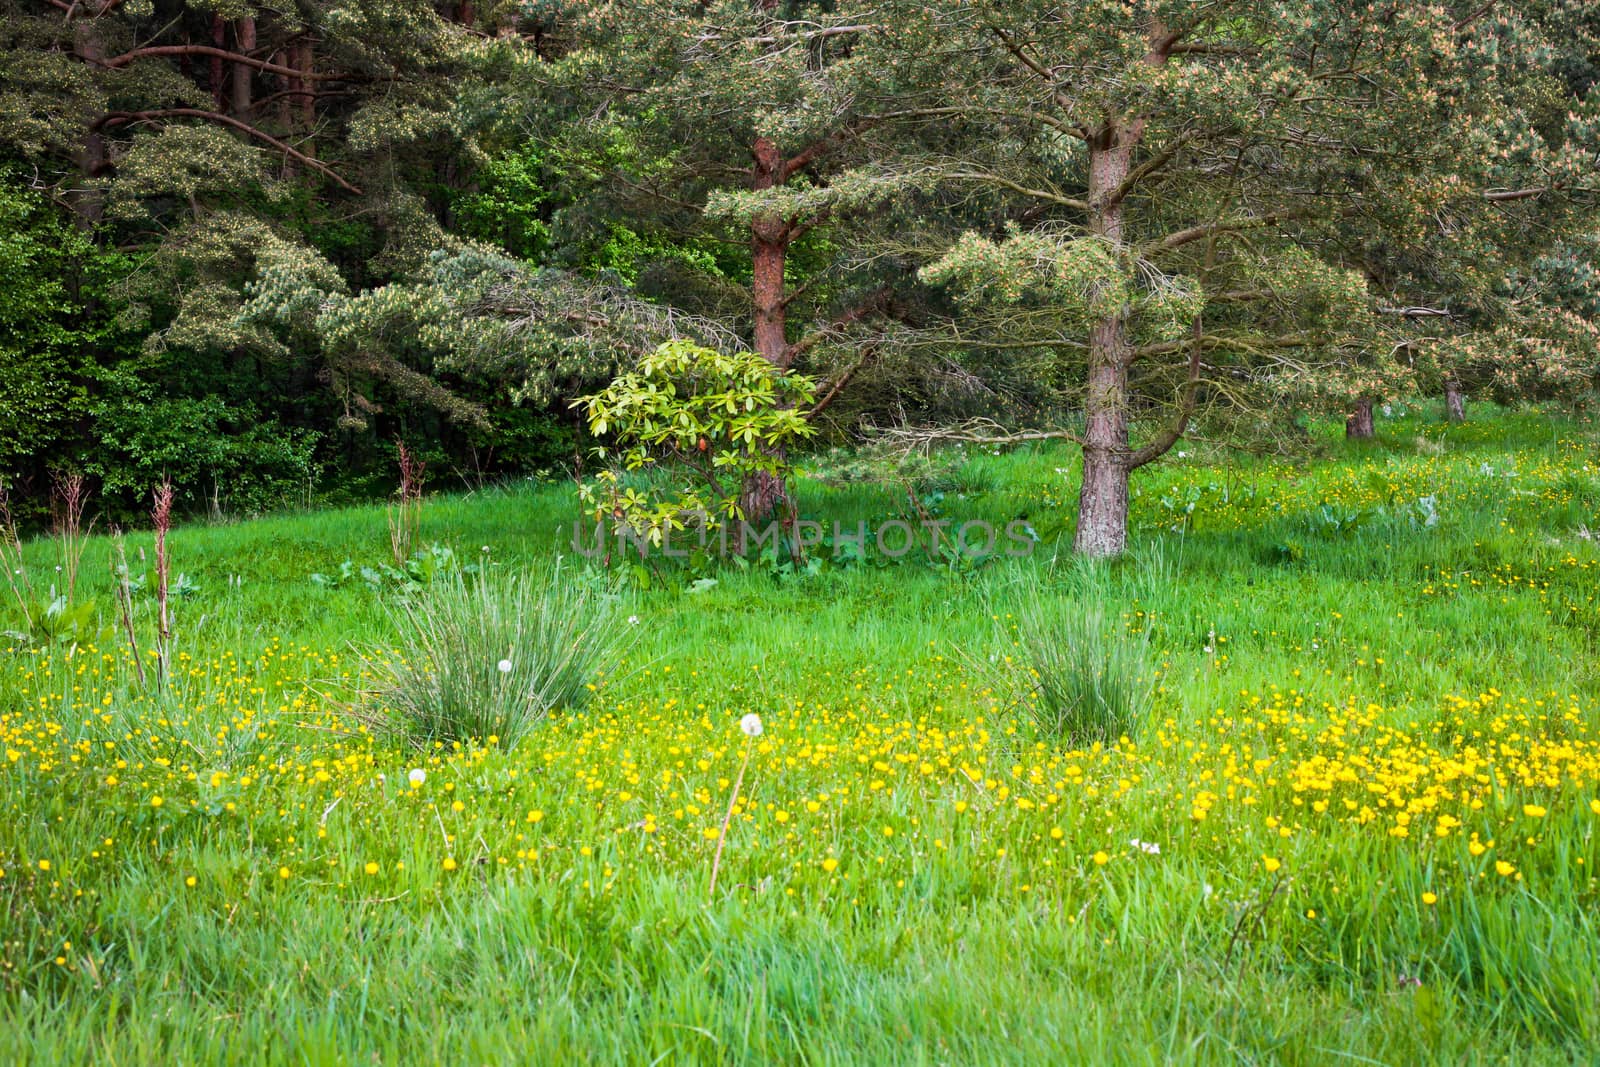 Grassy clearing in a native woodland with buttercups